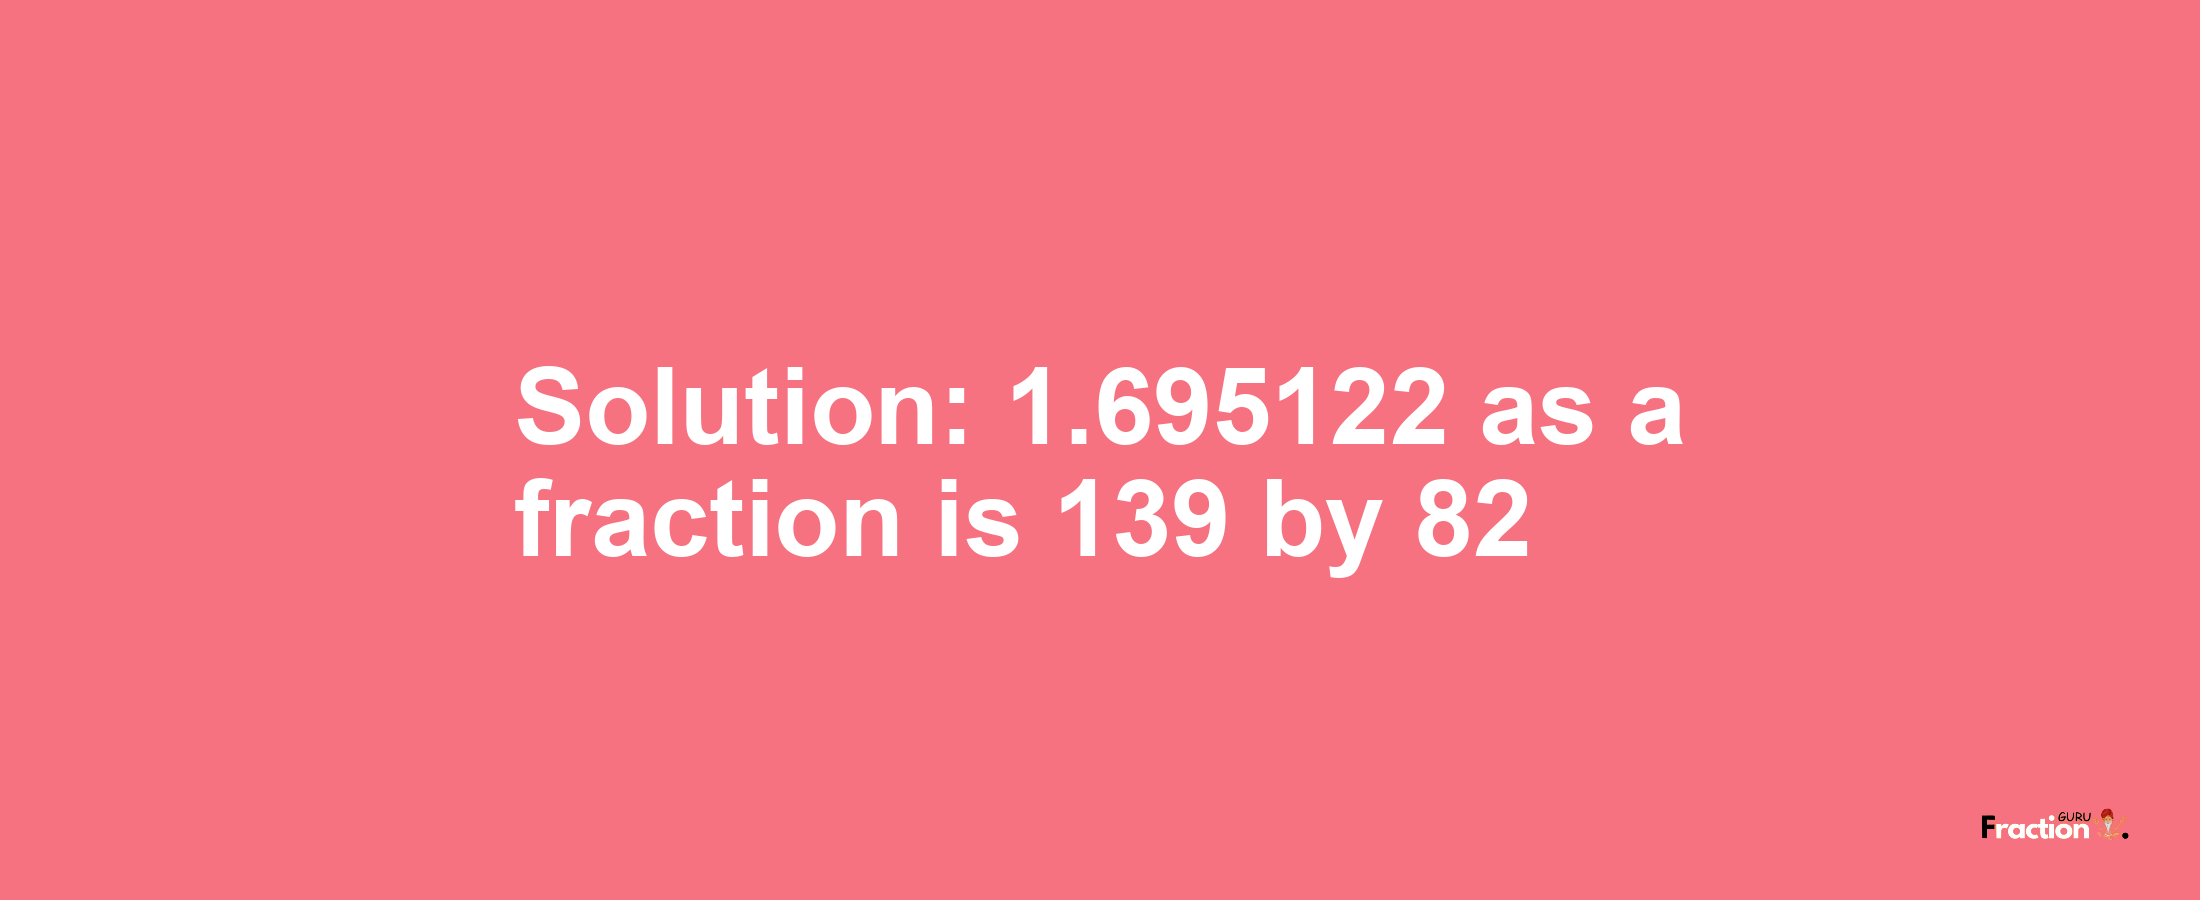 Solution:1.695122 as a fraction is 139/82